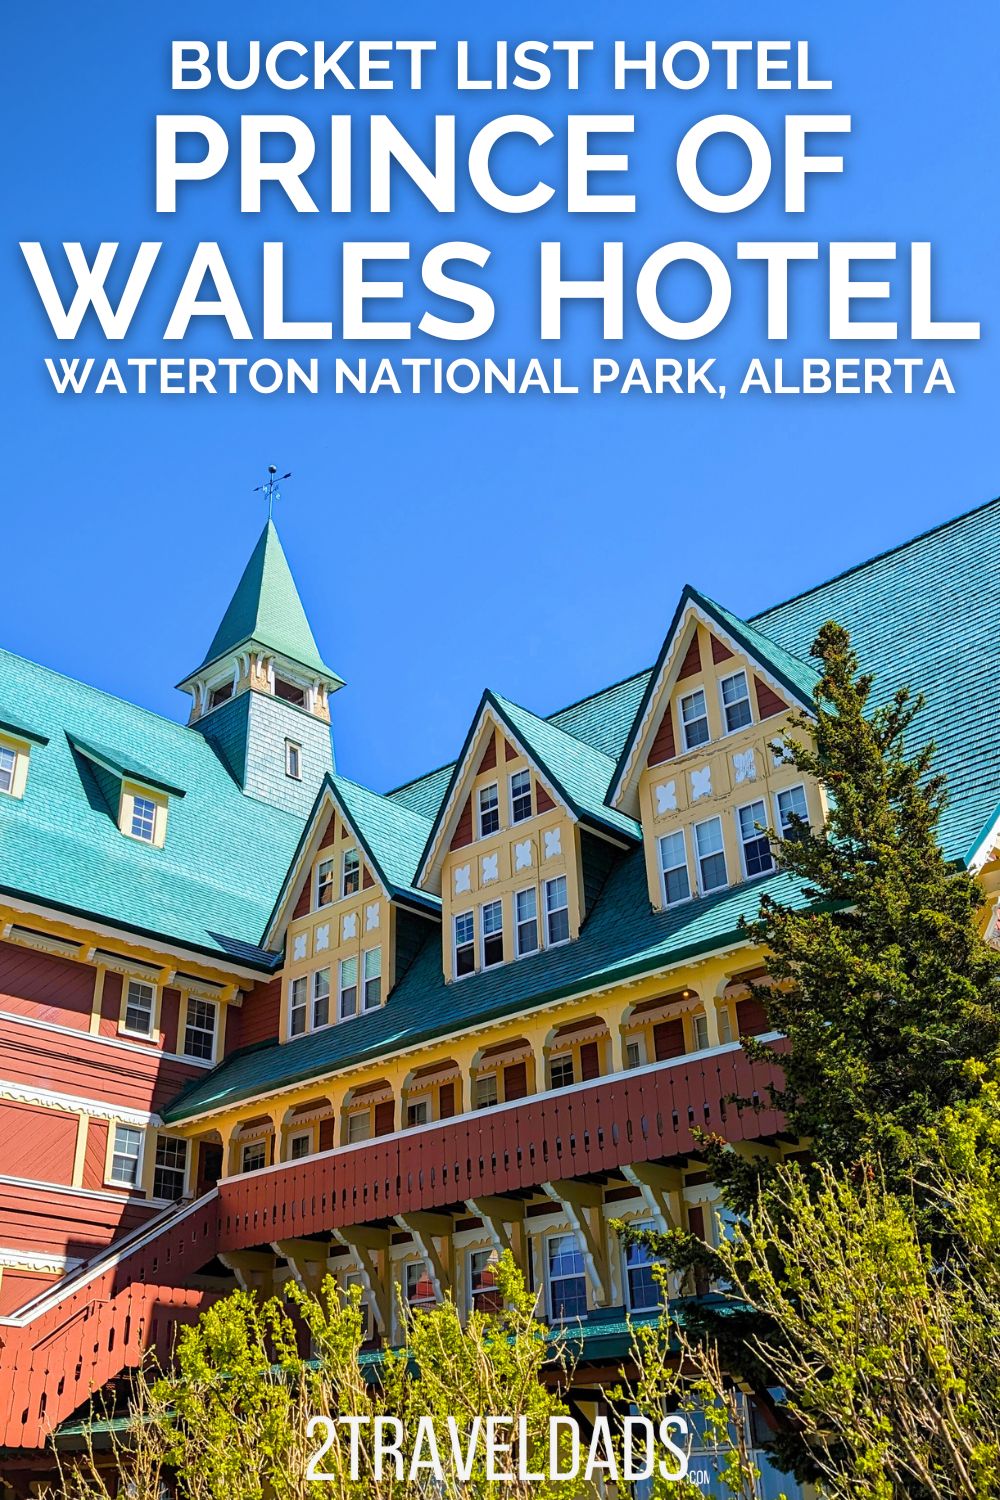 The Prince of Wales Hotel in Waterton Lakes National Park is a bucket list, vintage lodge you MUST plan for. Learn more about this beautiful hotel in Alberta and why it's a quintessential Canadian stay.